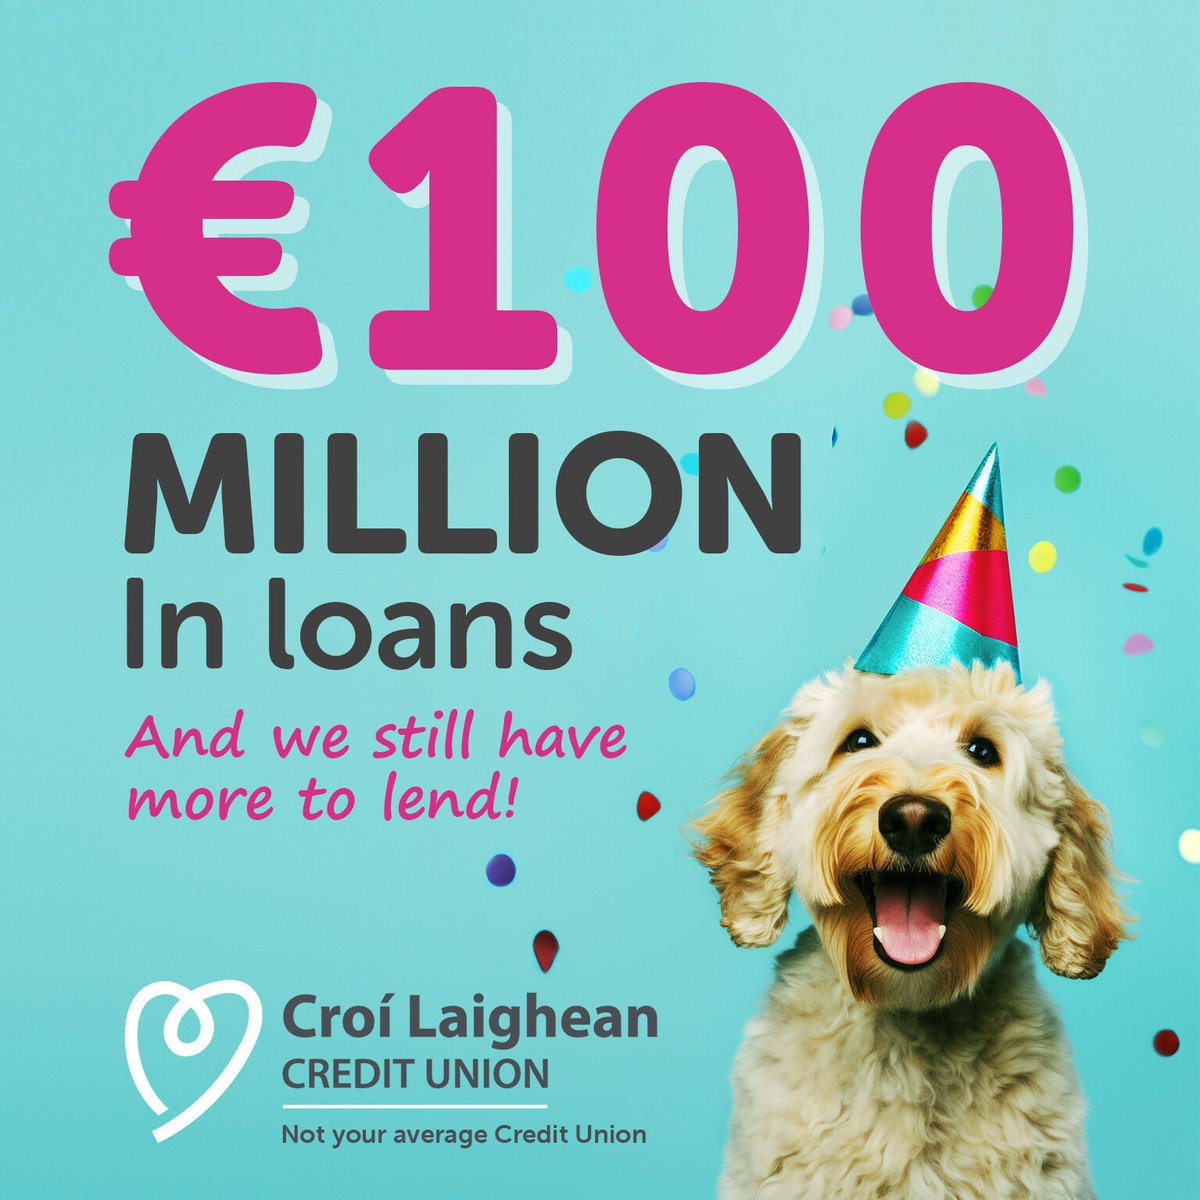 We just crossed the €100 Million mark in loans... and we still have more to lend! A big thanks to our fantastic members and our team for making this possible. If you're not a member, join today and get access to the best loan & mortgage rates. 👉 bit.ly/46syPnK